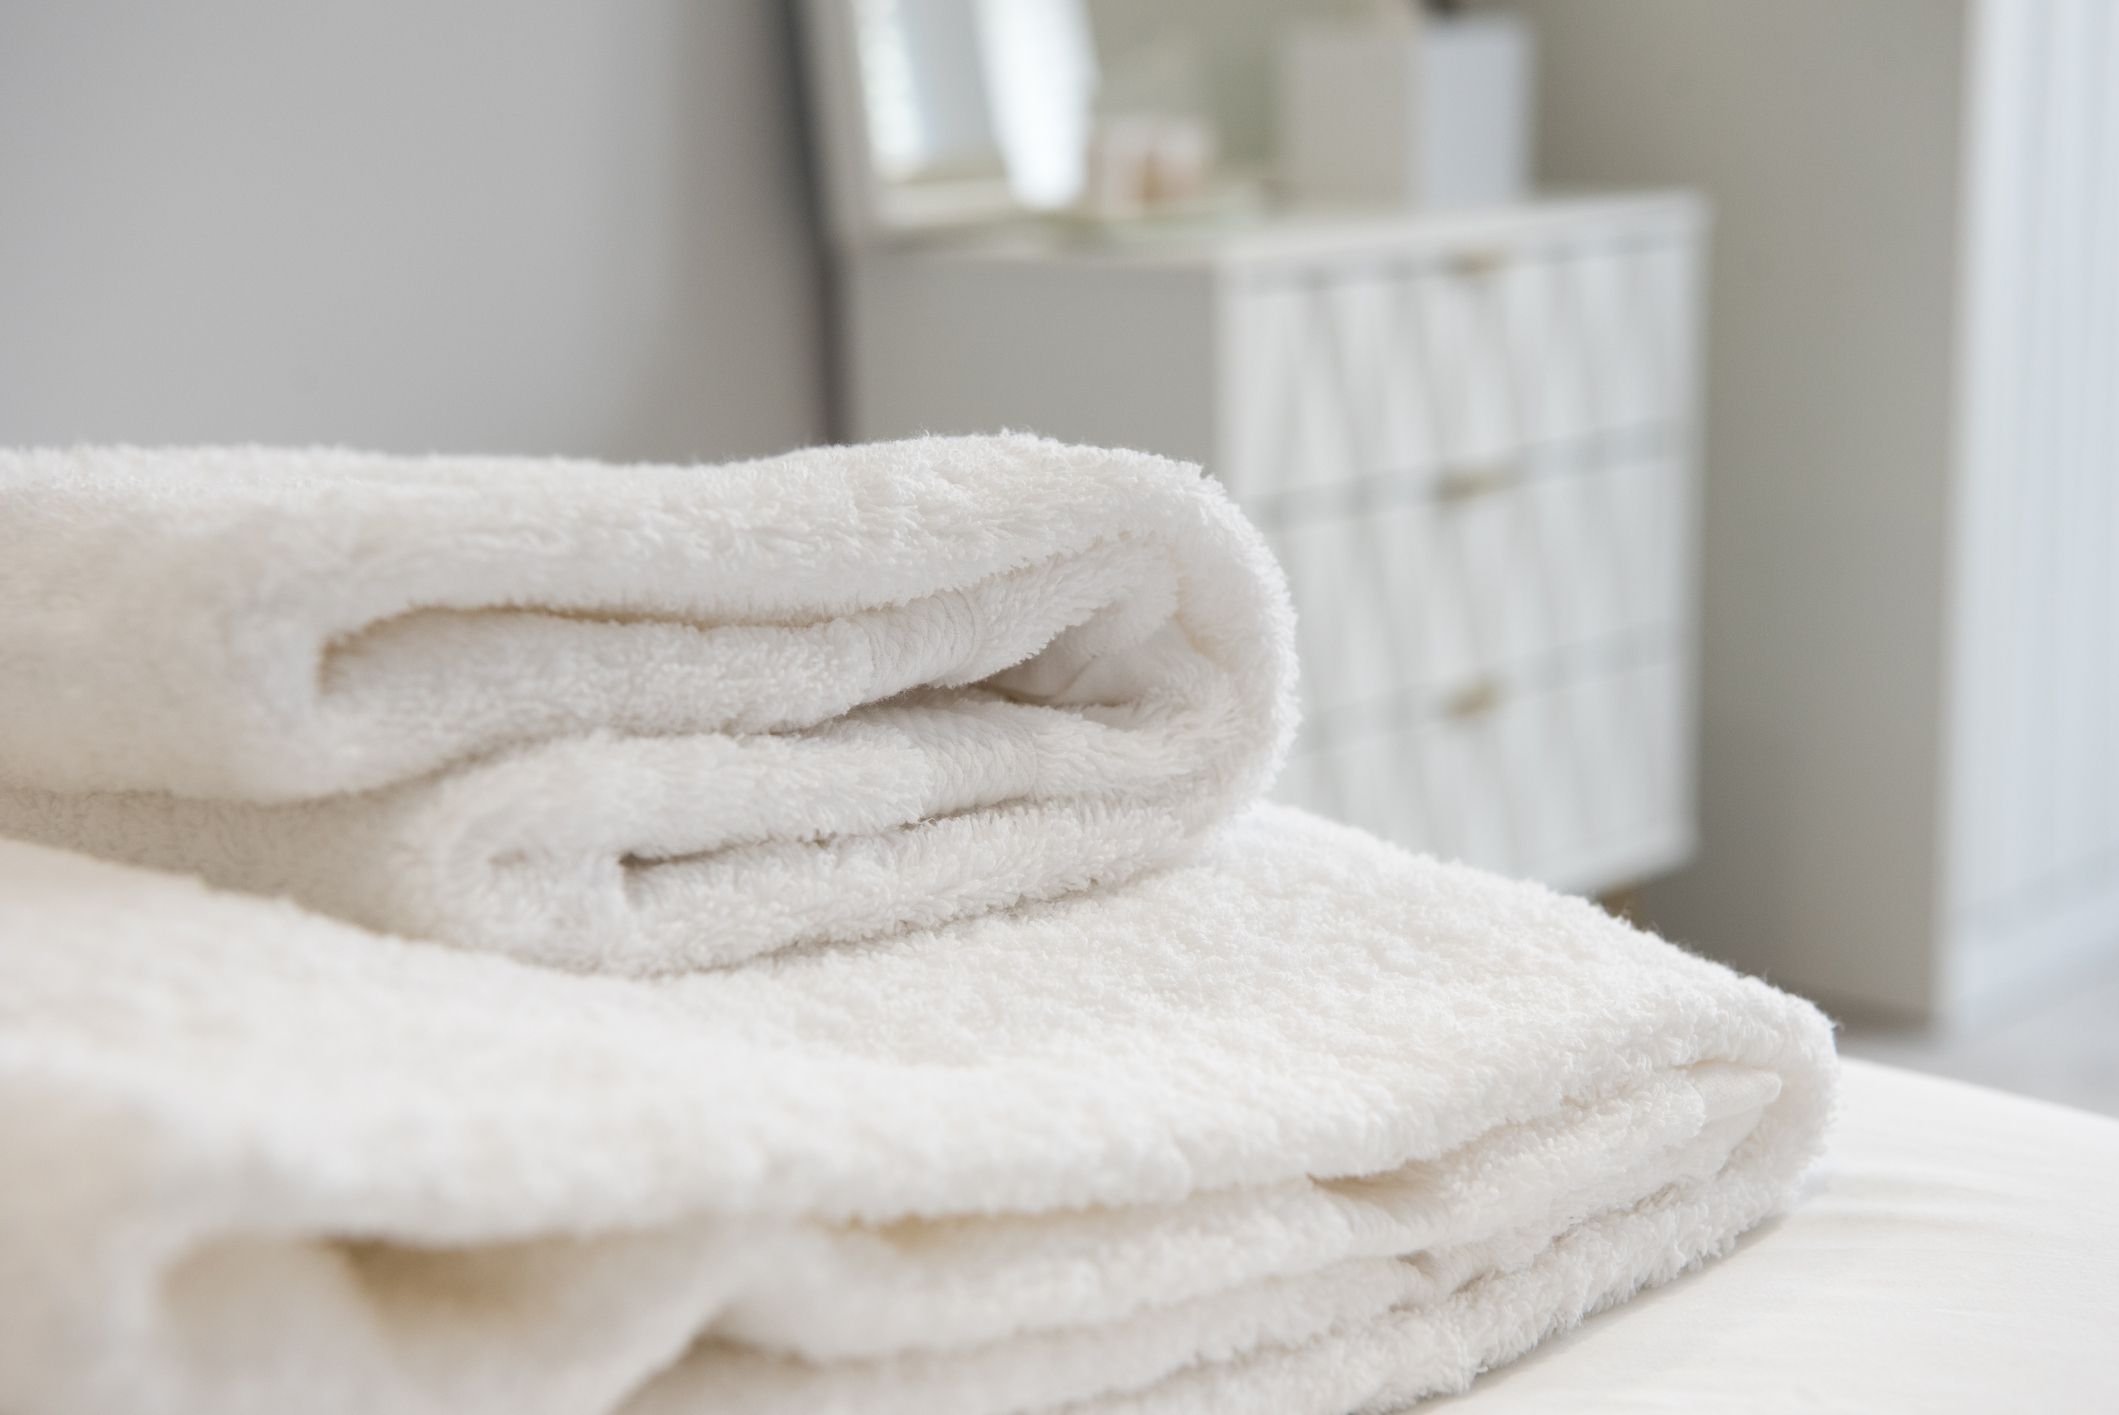 The Best, Softest, and Most Absorbent Bath Sheets You Can Buy